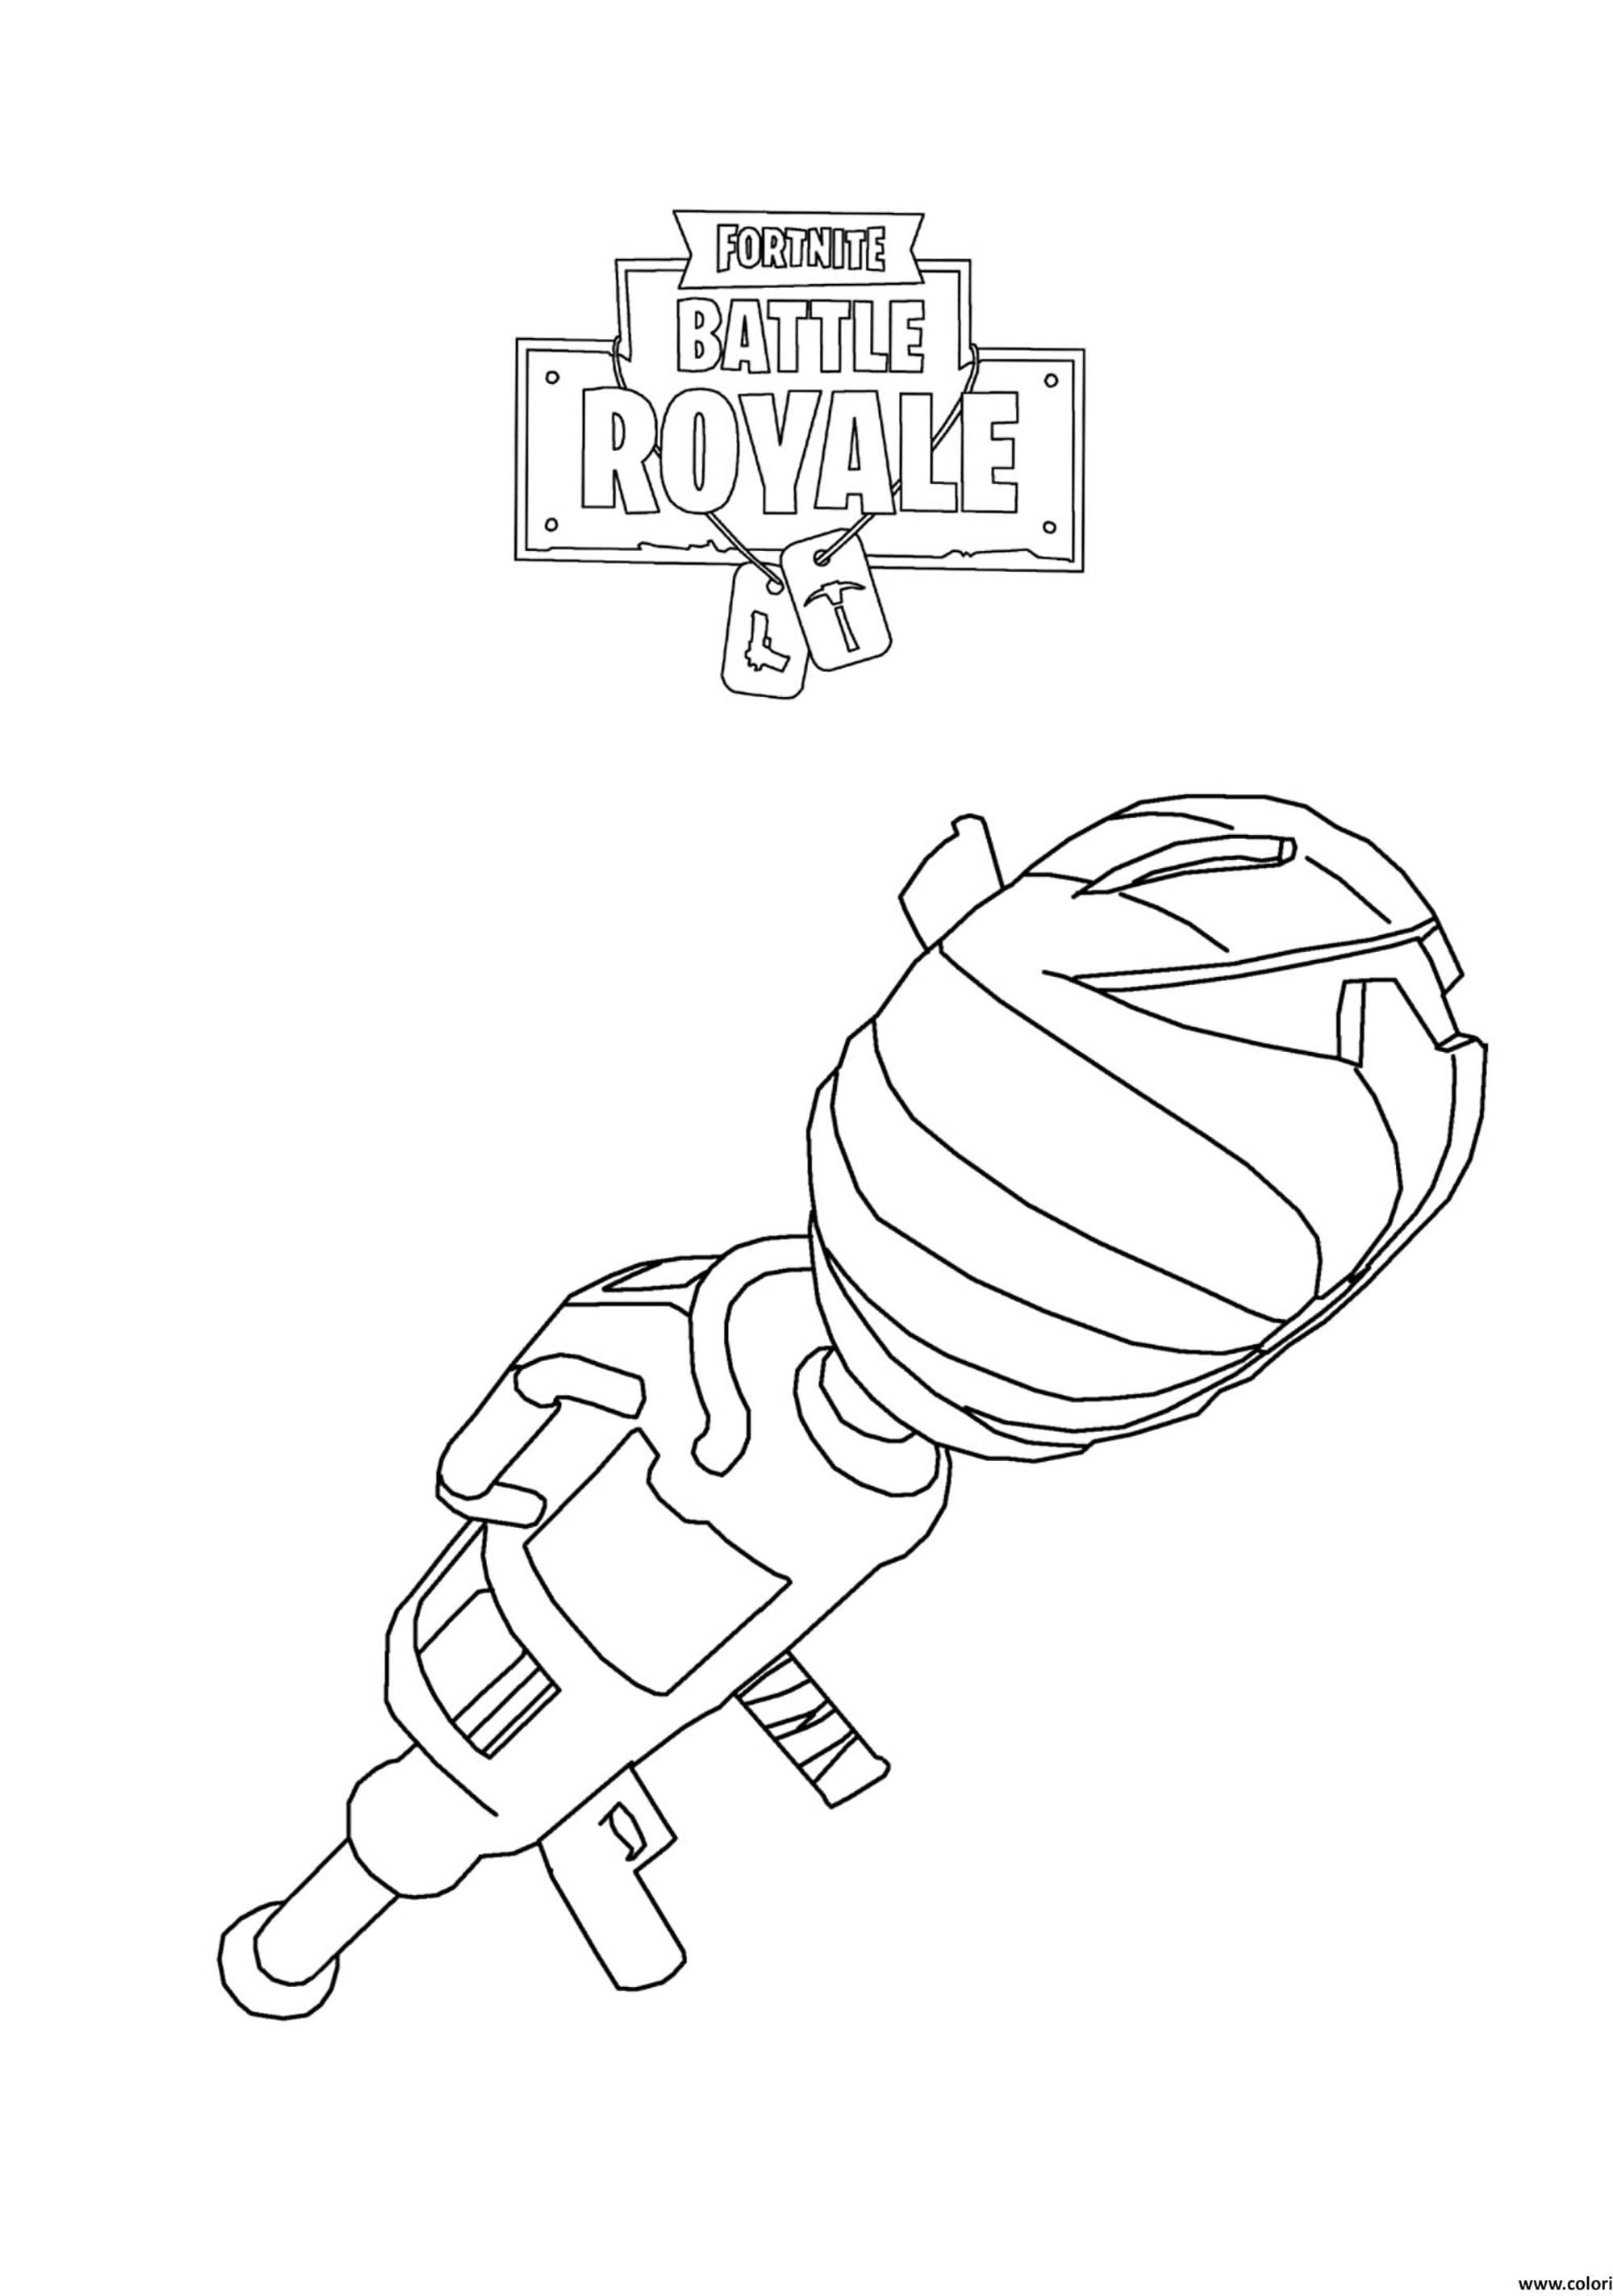 Free Fortnite Battle Royale coloring page to print & color